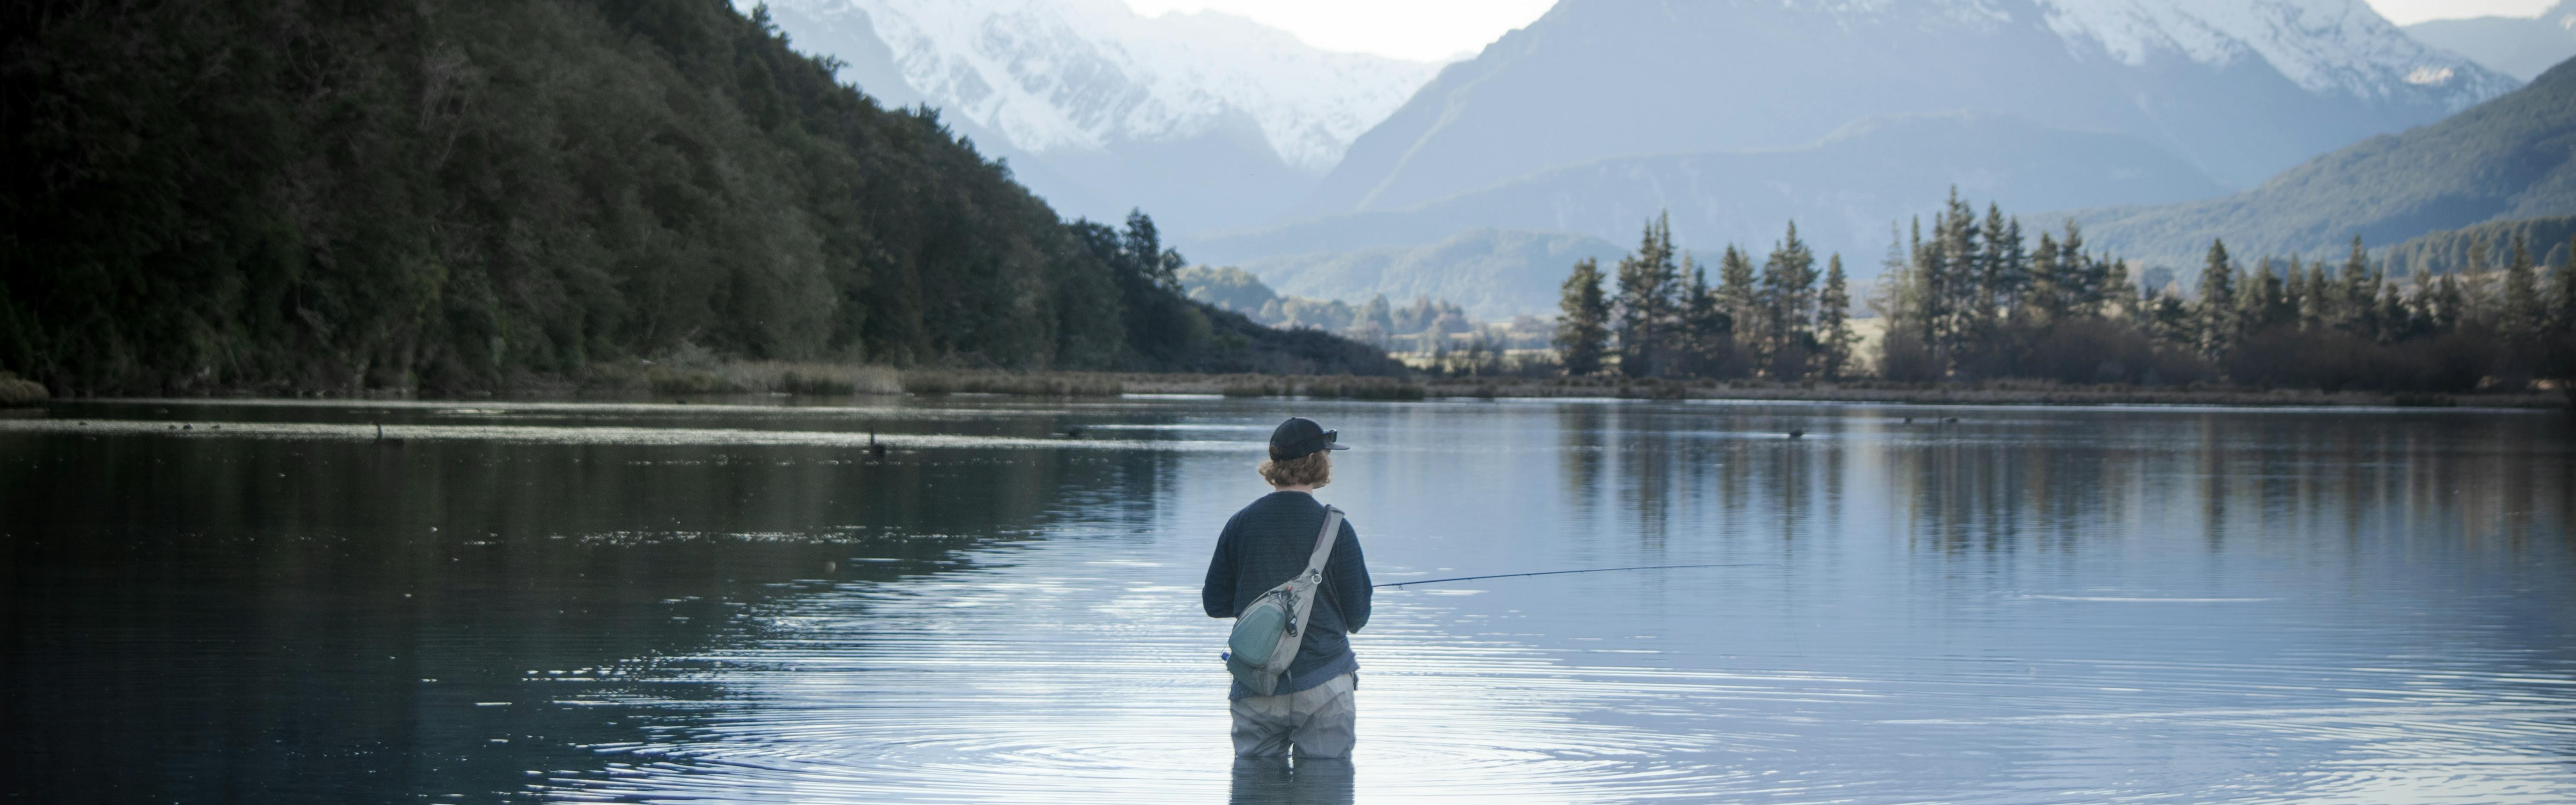 Person stands in the middle of an alpine lake fly fishing.